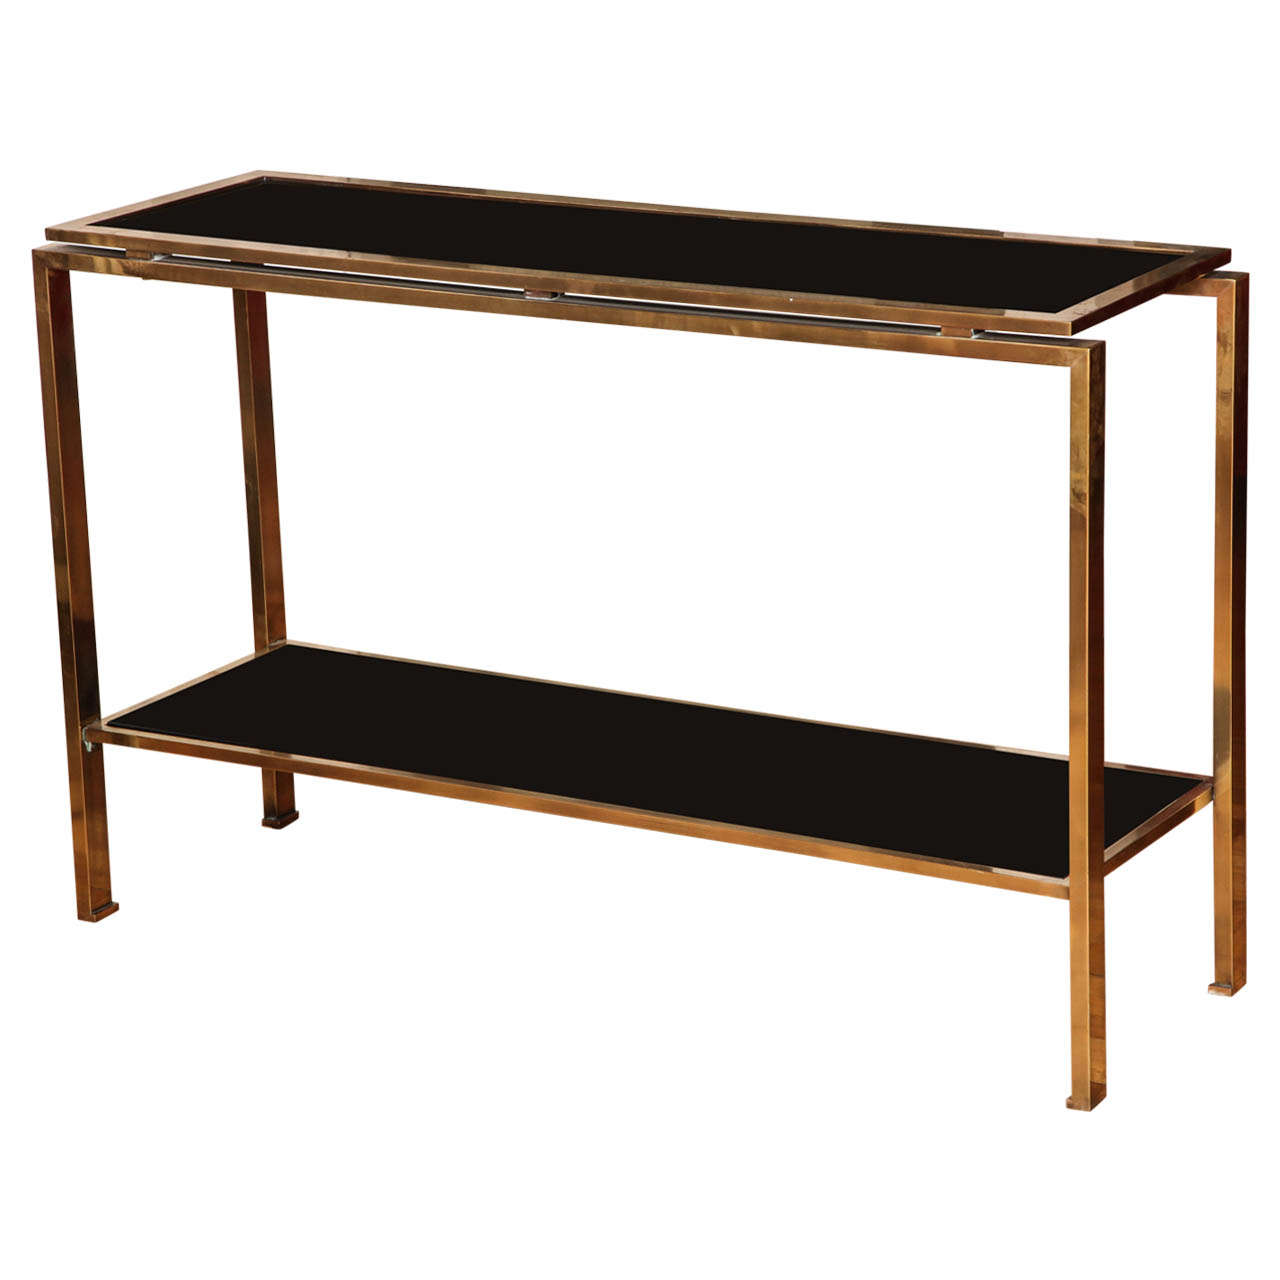 A Two-Tier Brass and Black Glass Console Table, France c. 1970